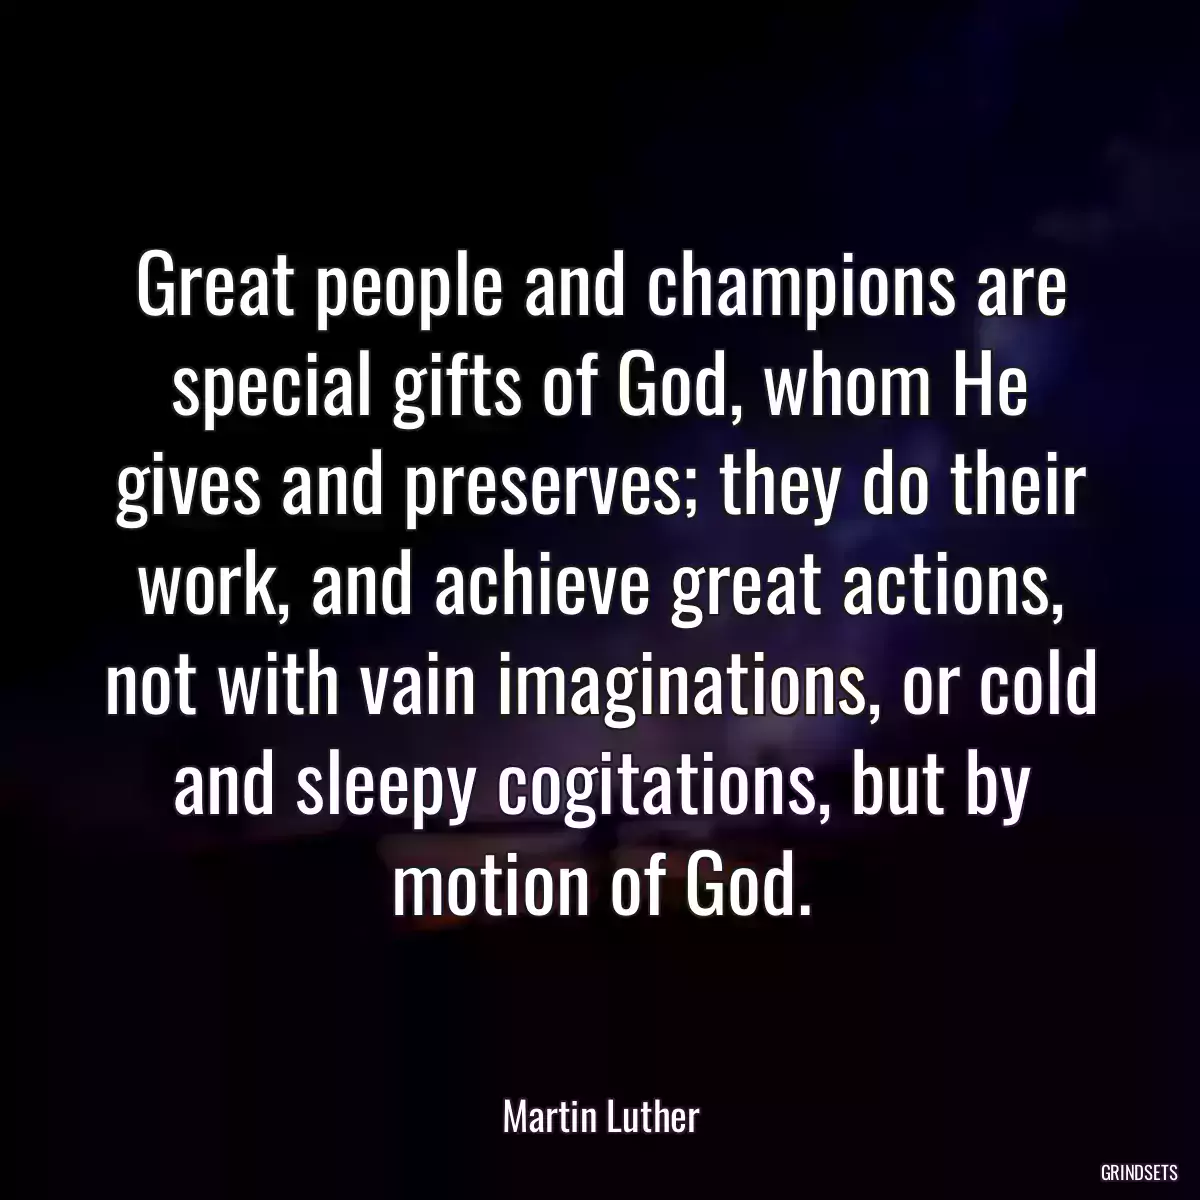 Great people and champions are special gifts of God, whom He gives and preserves; they do their work, and achieve great actions, not with vain imaginations, or cold and sleepy cogitations, but by motion of God.